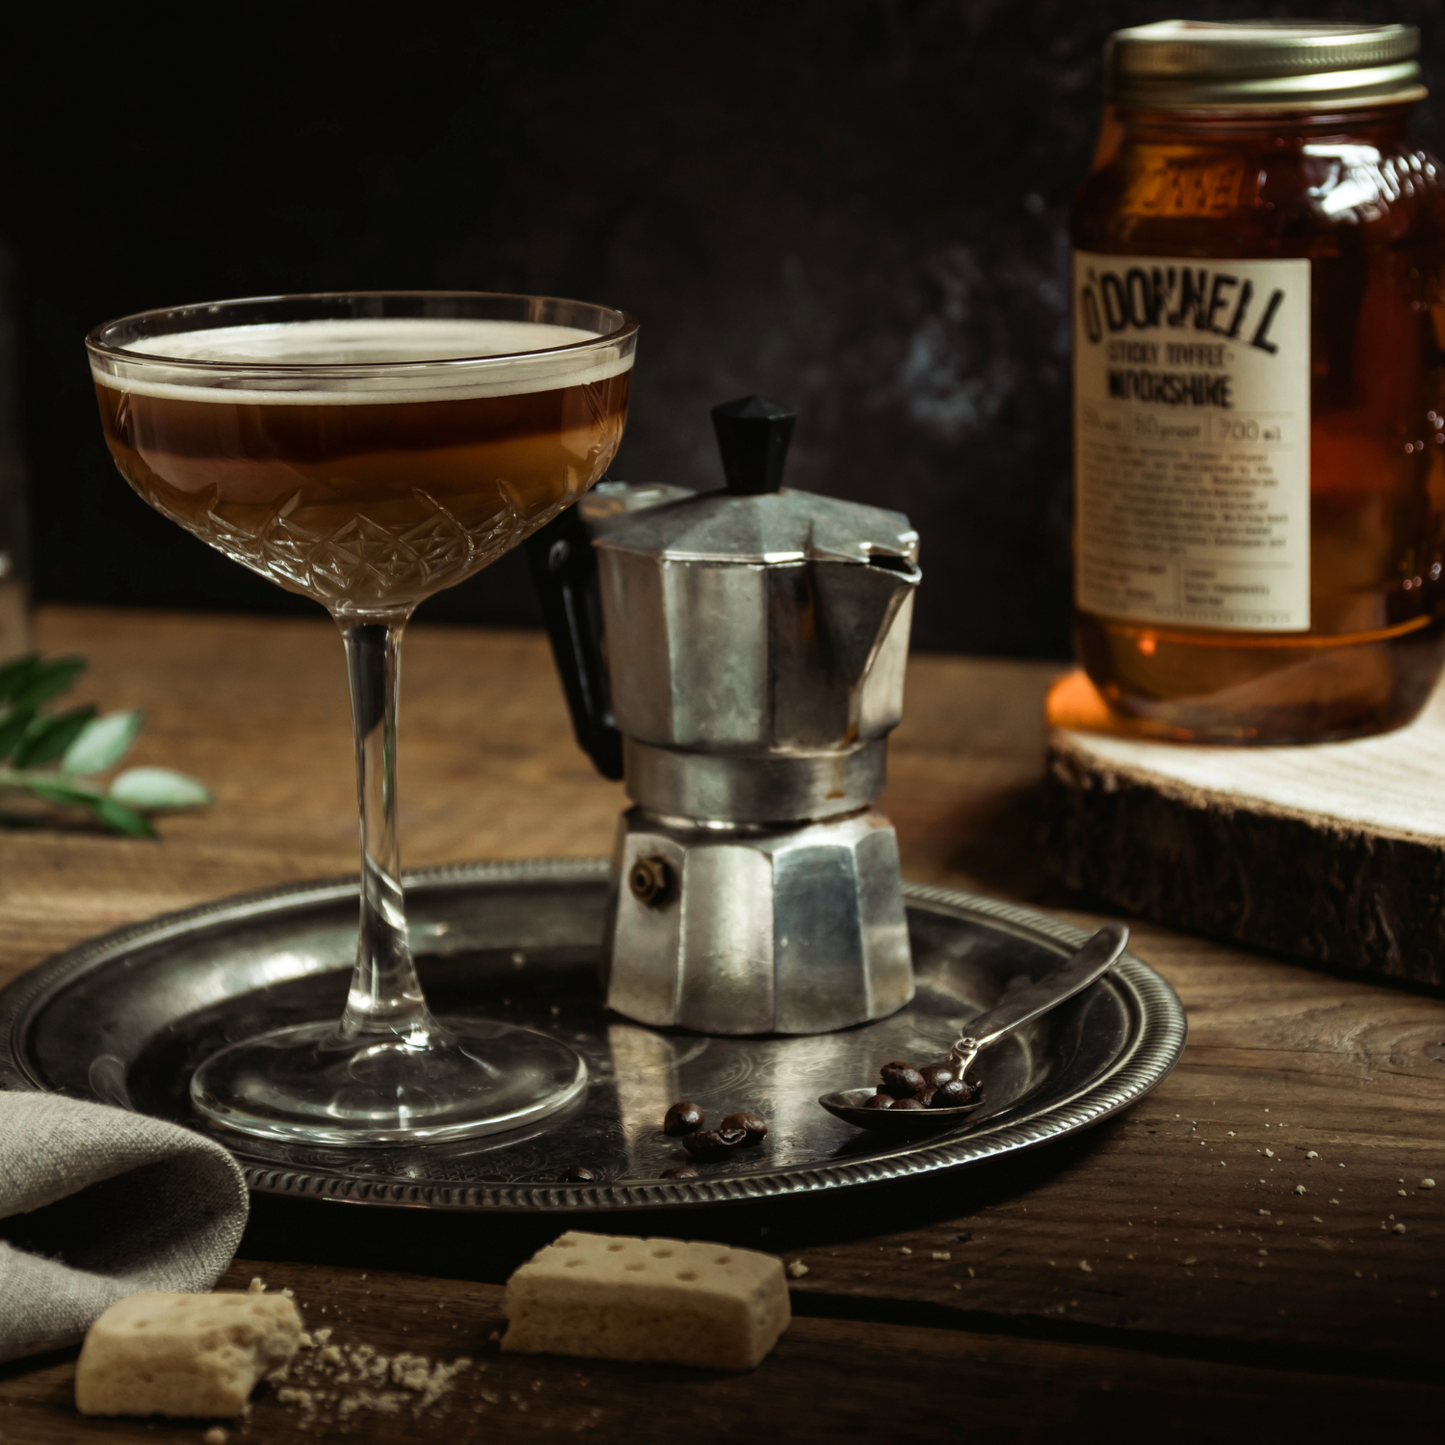 O’Donnell Sticky Toffee Moonshine